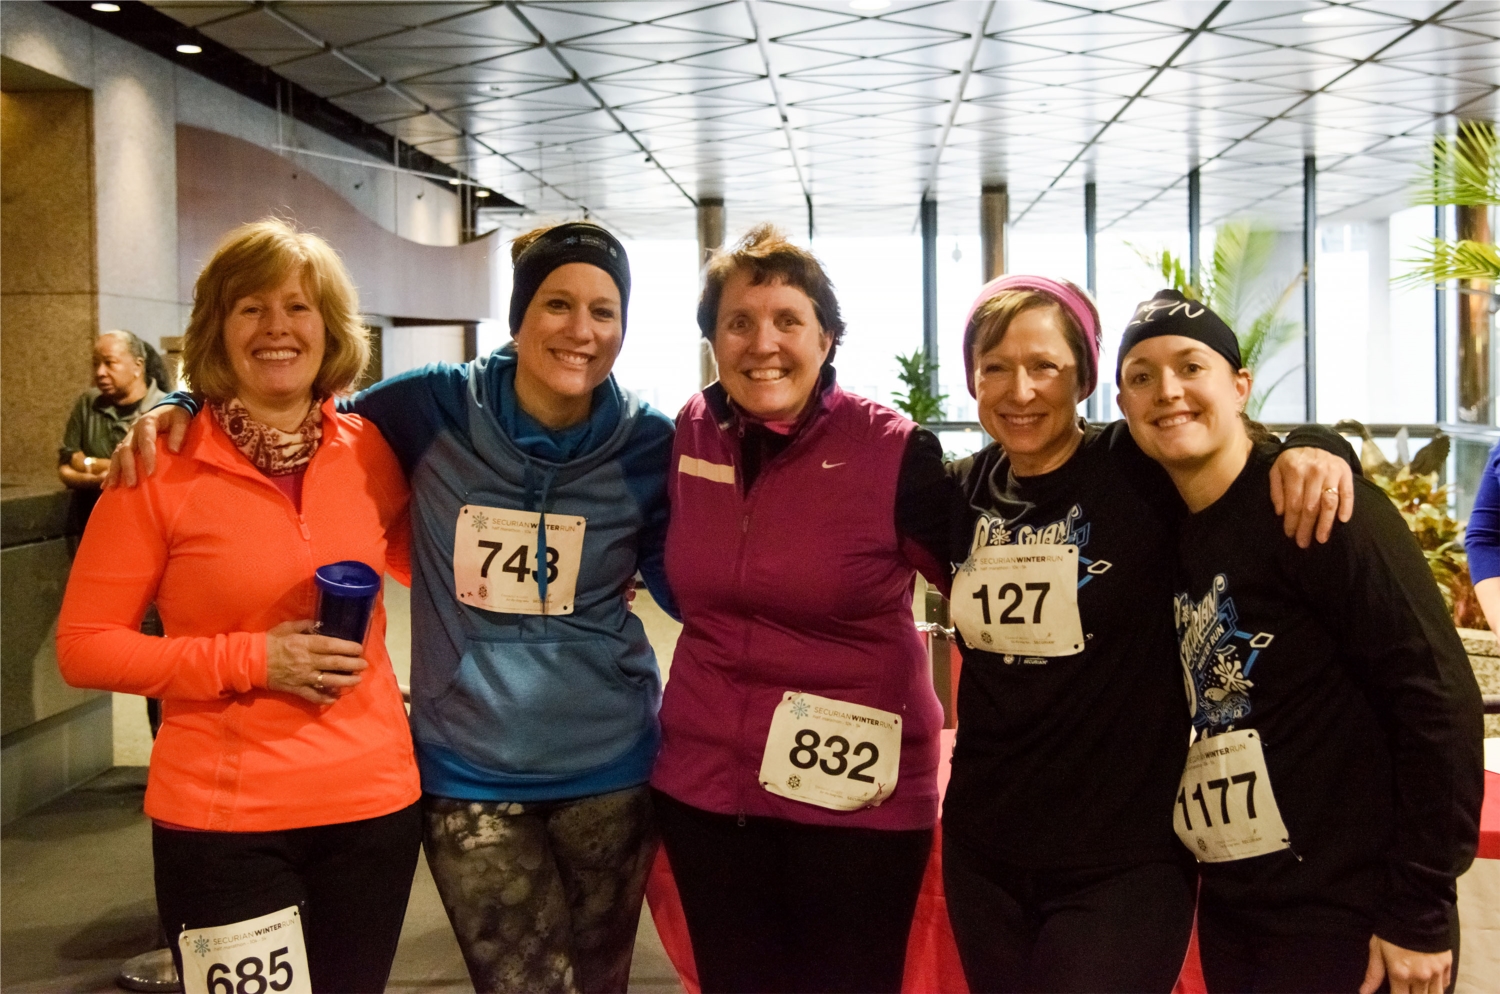 Associates pose for a picture after completing the 5k or 10k Securian Winter Run, which Securian sponsors each year in support of the Saint Paul Winter Carnival.